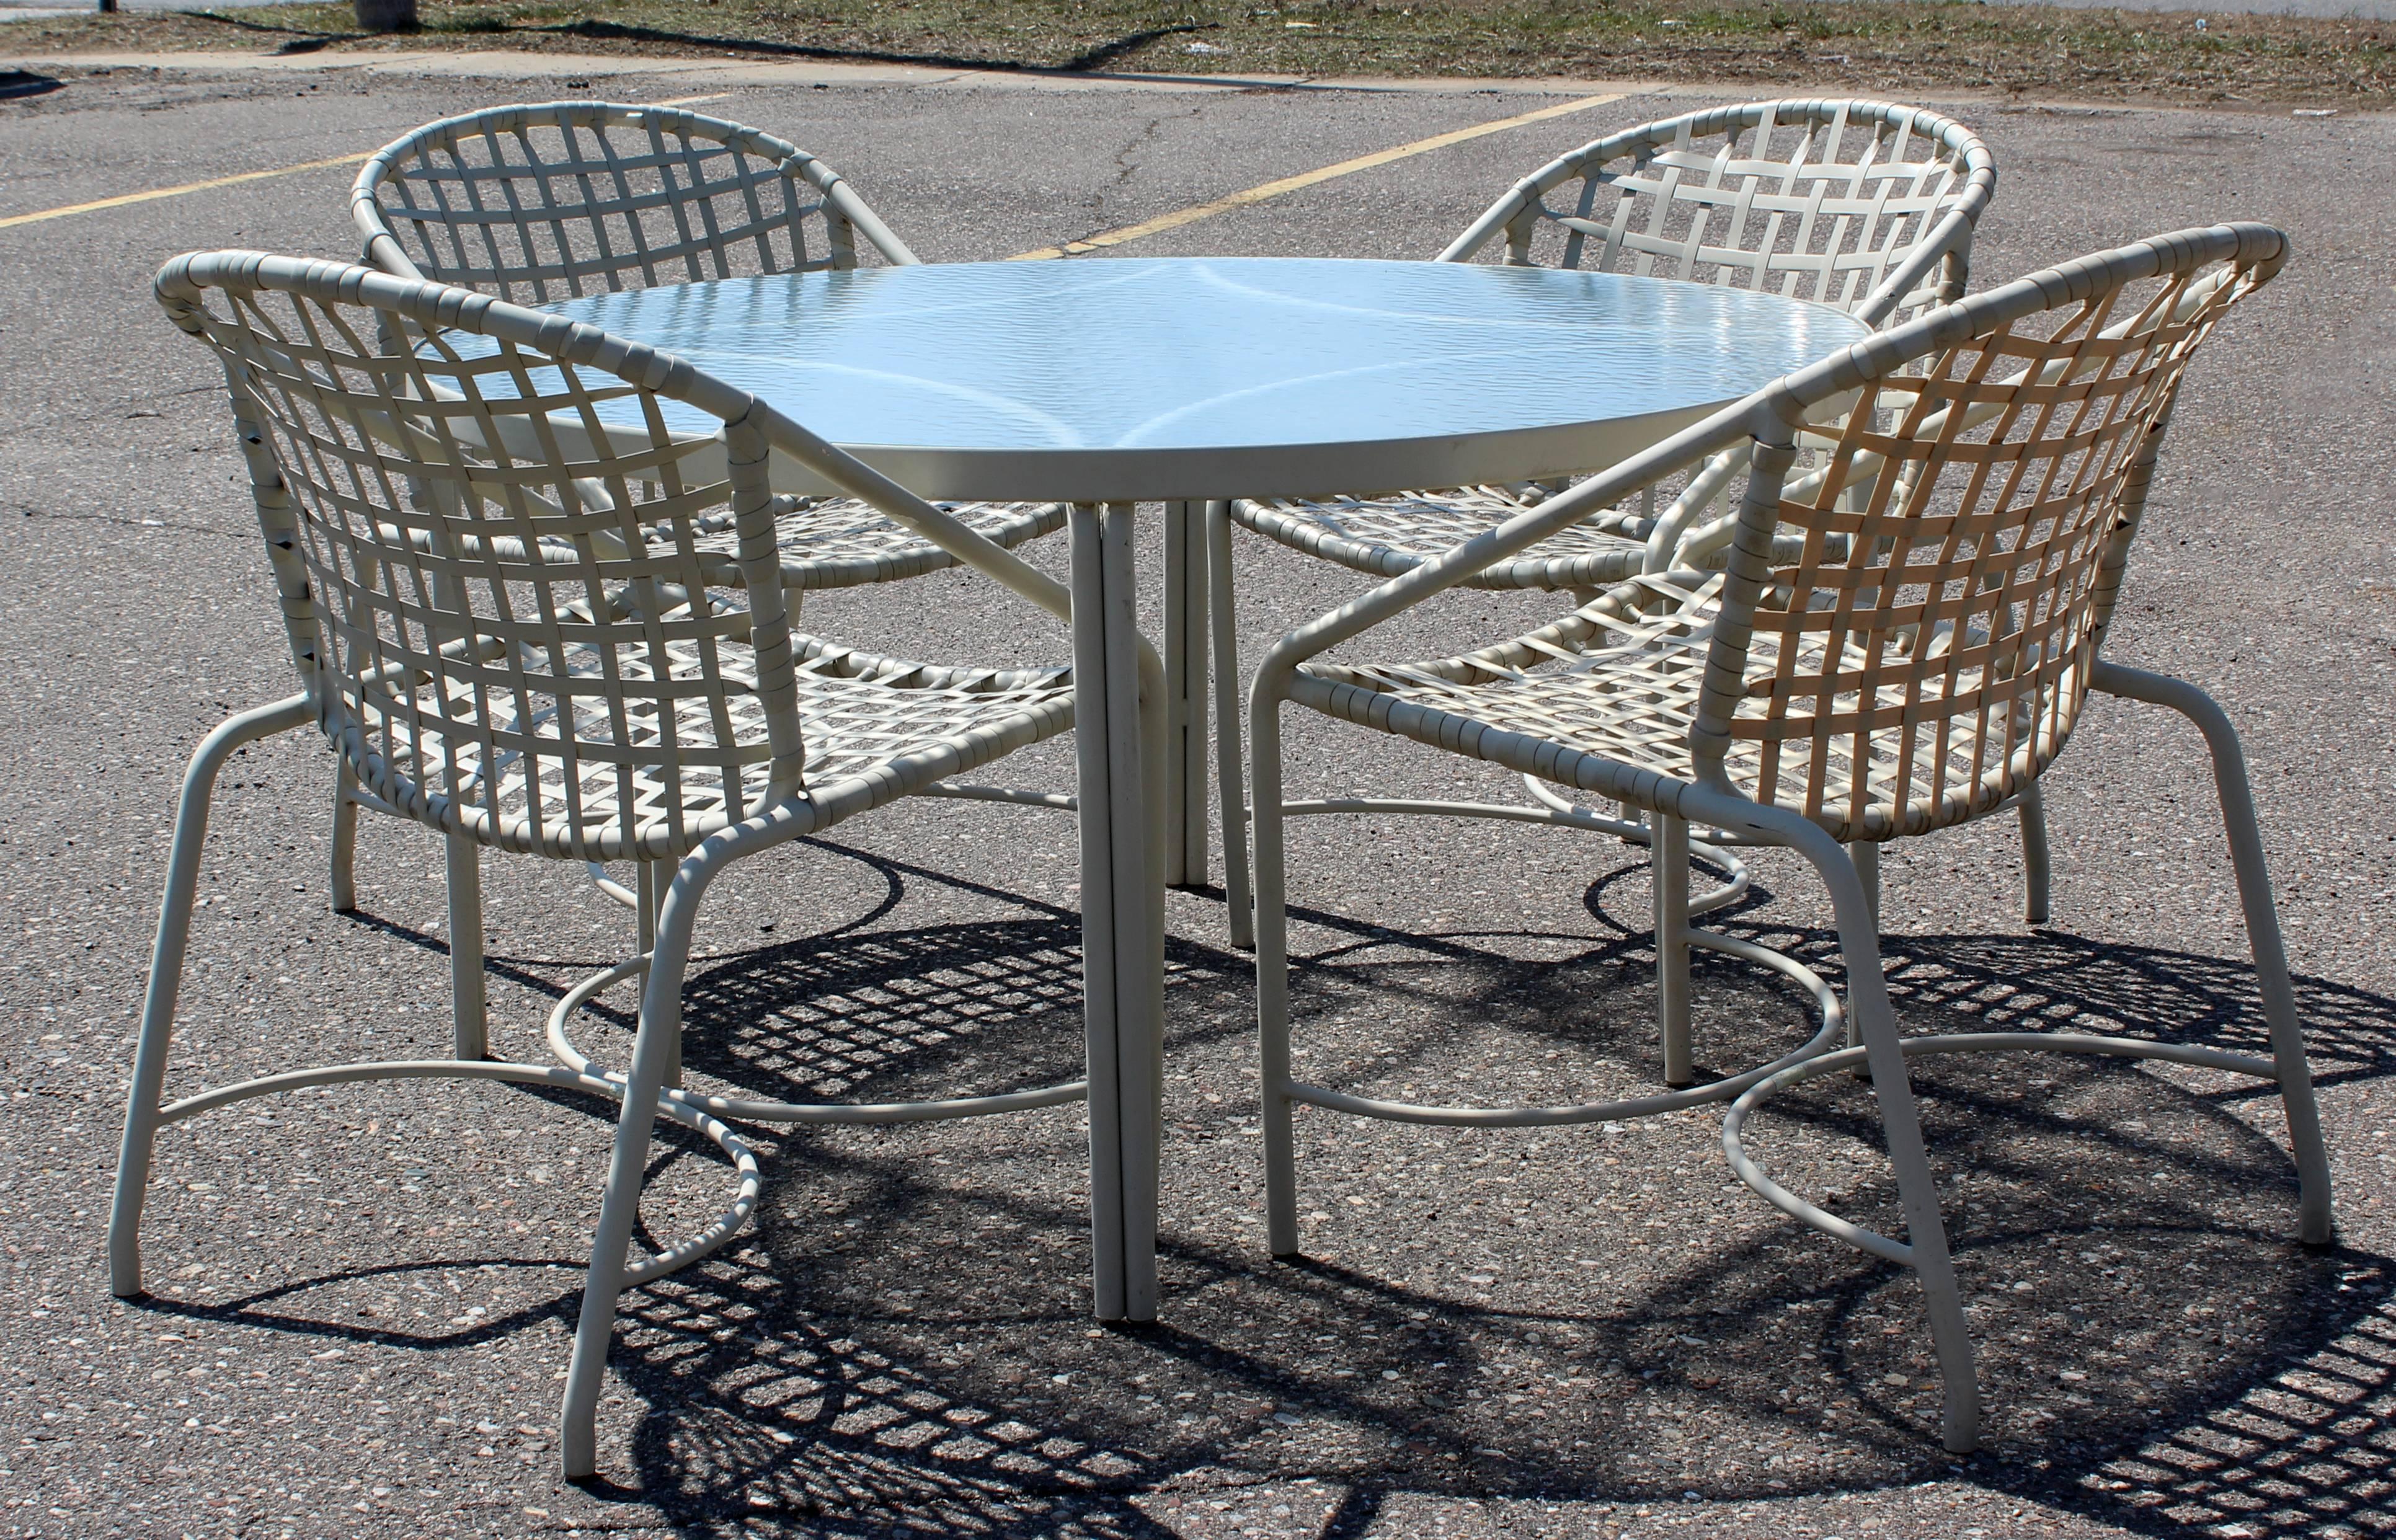 For your consideration is an outdoor patio dining set, including a table with a glass top and four chairs, by Brown Jordan the Kantan series, circa 1960s. In excellent condition. The dimensions of the table are 47